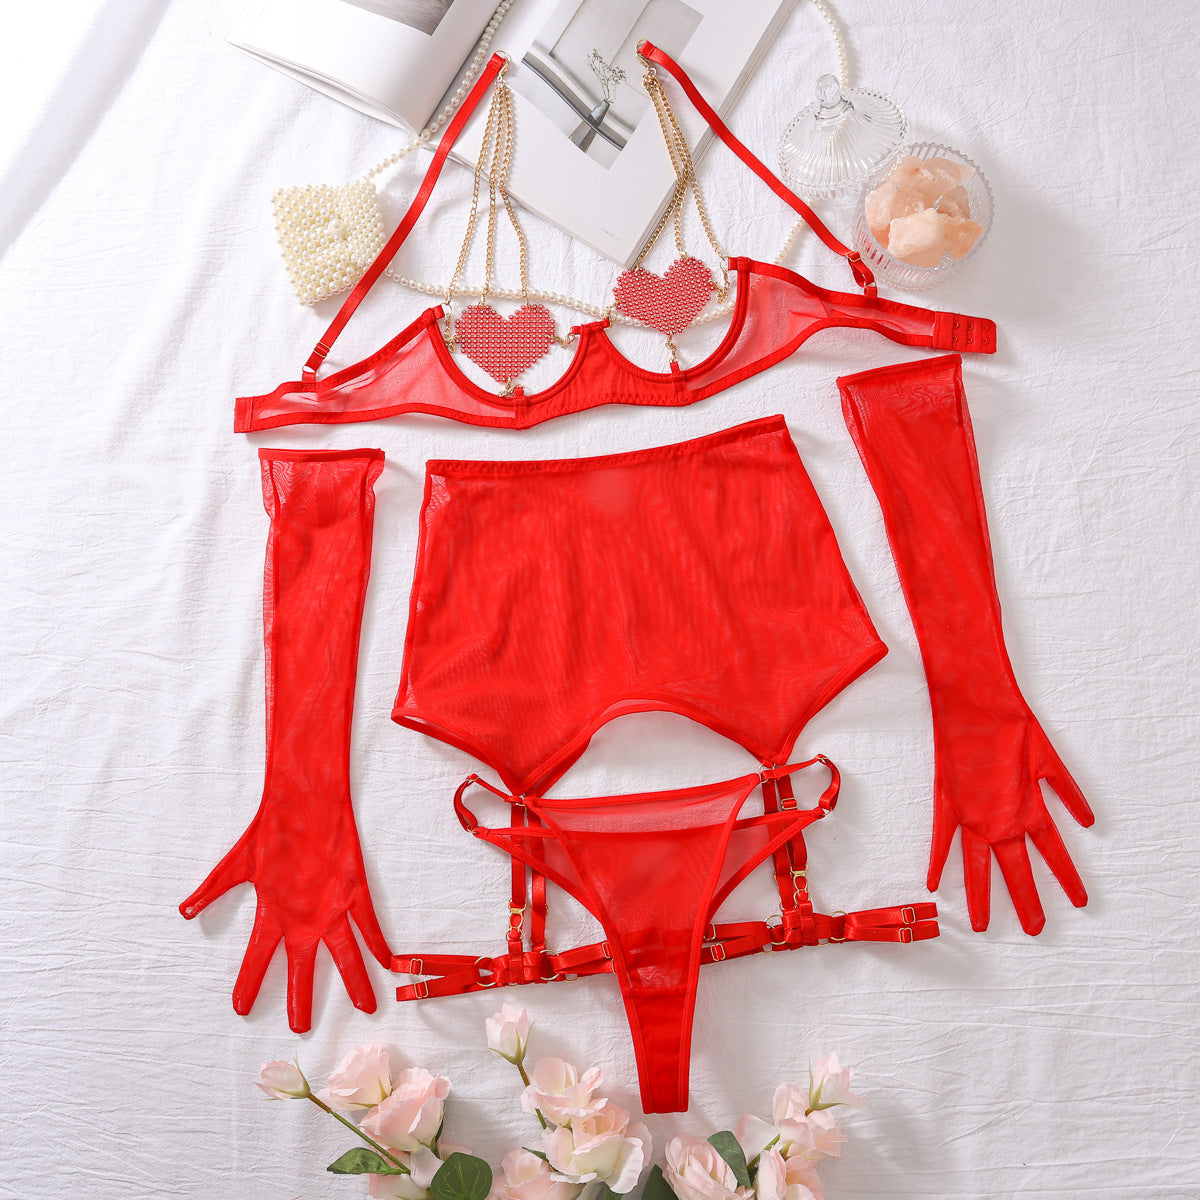 Find My Heart(s) On A Chain Lingerie Set w/ Gloves